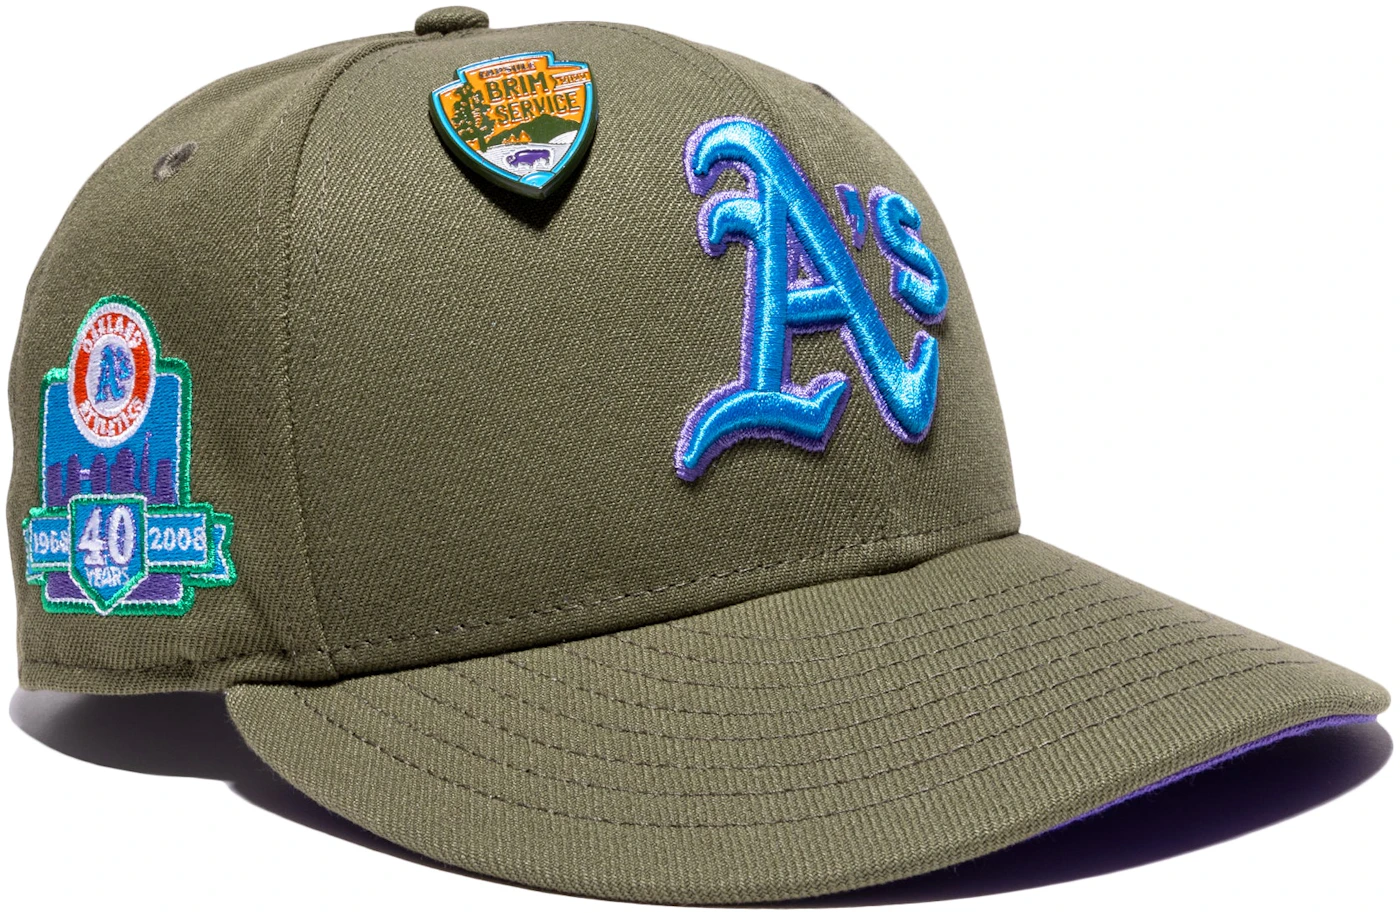 https://images.stockx.com/images/New-Era-Oakland-Athletics-Capsule-Brim-Service-Collection-40-Years-59Fifty-Fitted-Hat-Green-Purple.jpg?fit=fill&bg=FFFFFF&w=700&h=500&fm=webp&auto=compress&q=90&dpr=2&trim=color&updated_at=1642558531?height=78&width=78